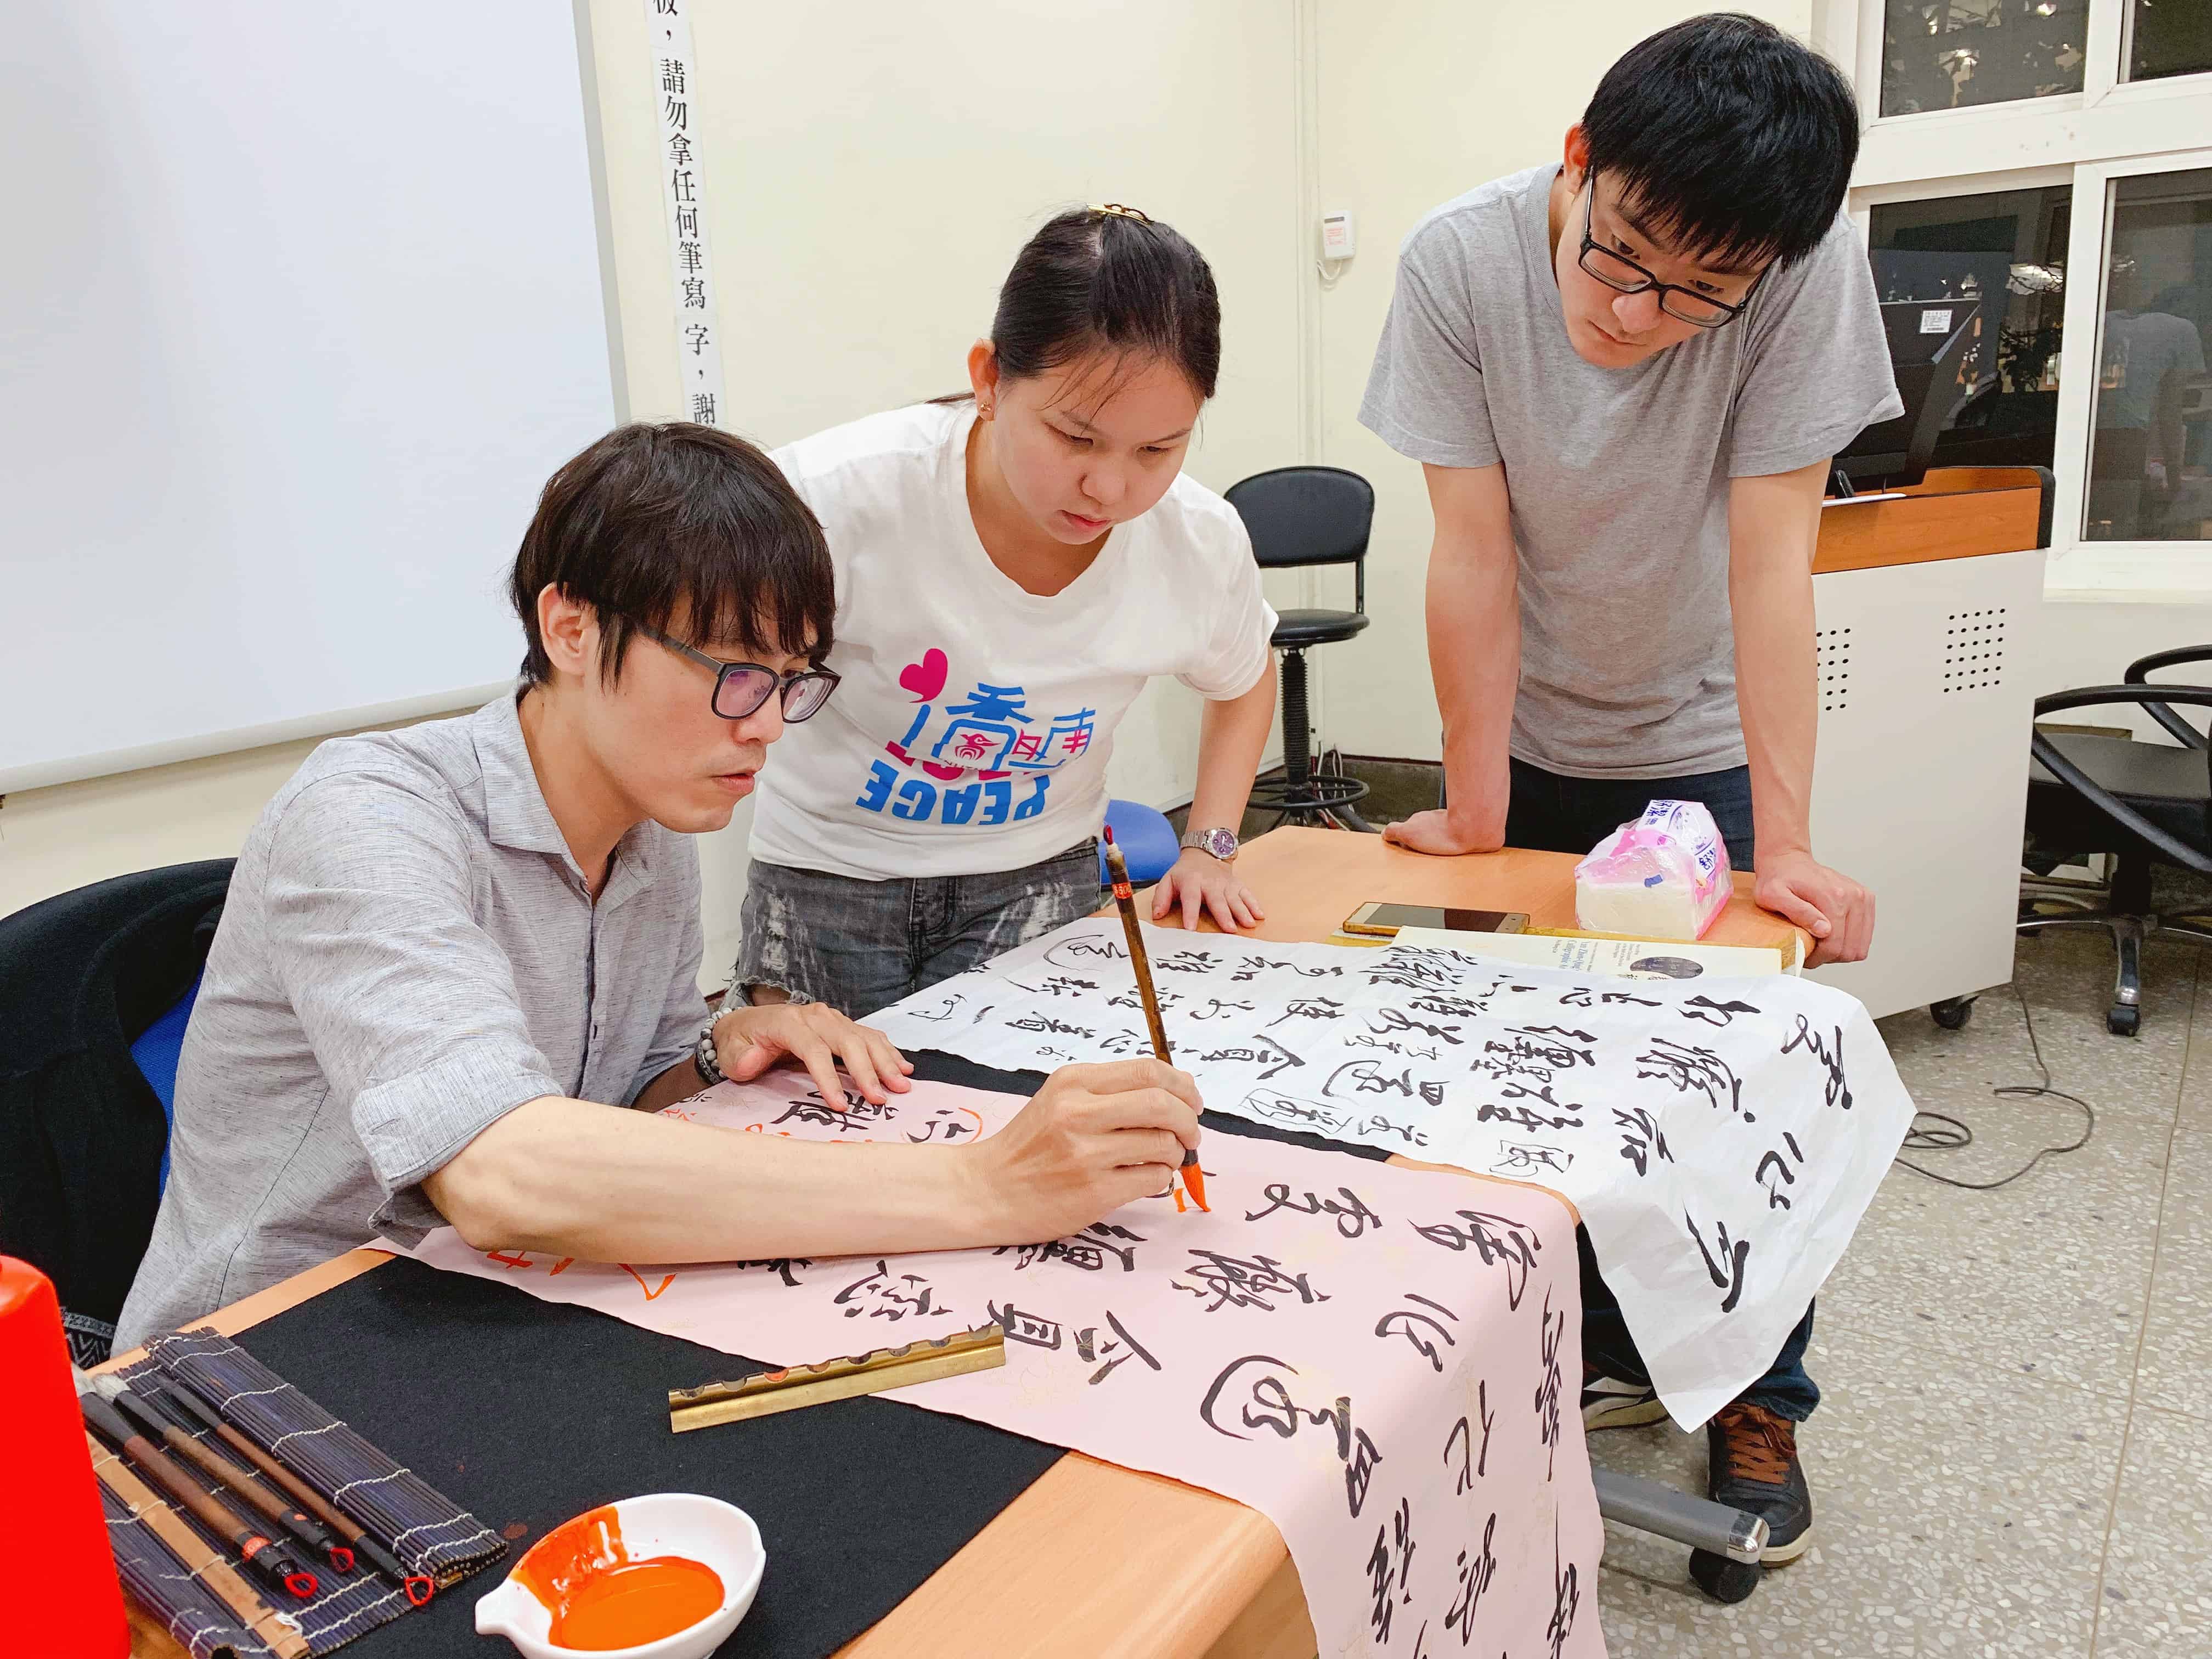 107-2 Calligraphy Class for Foreign Students